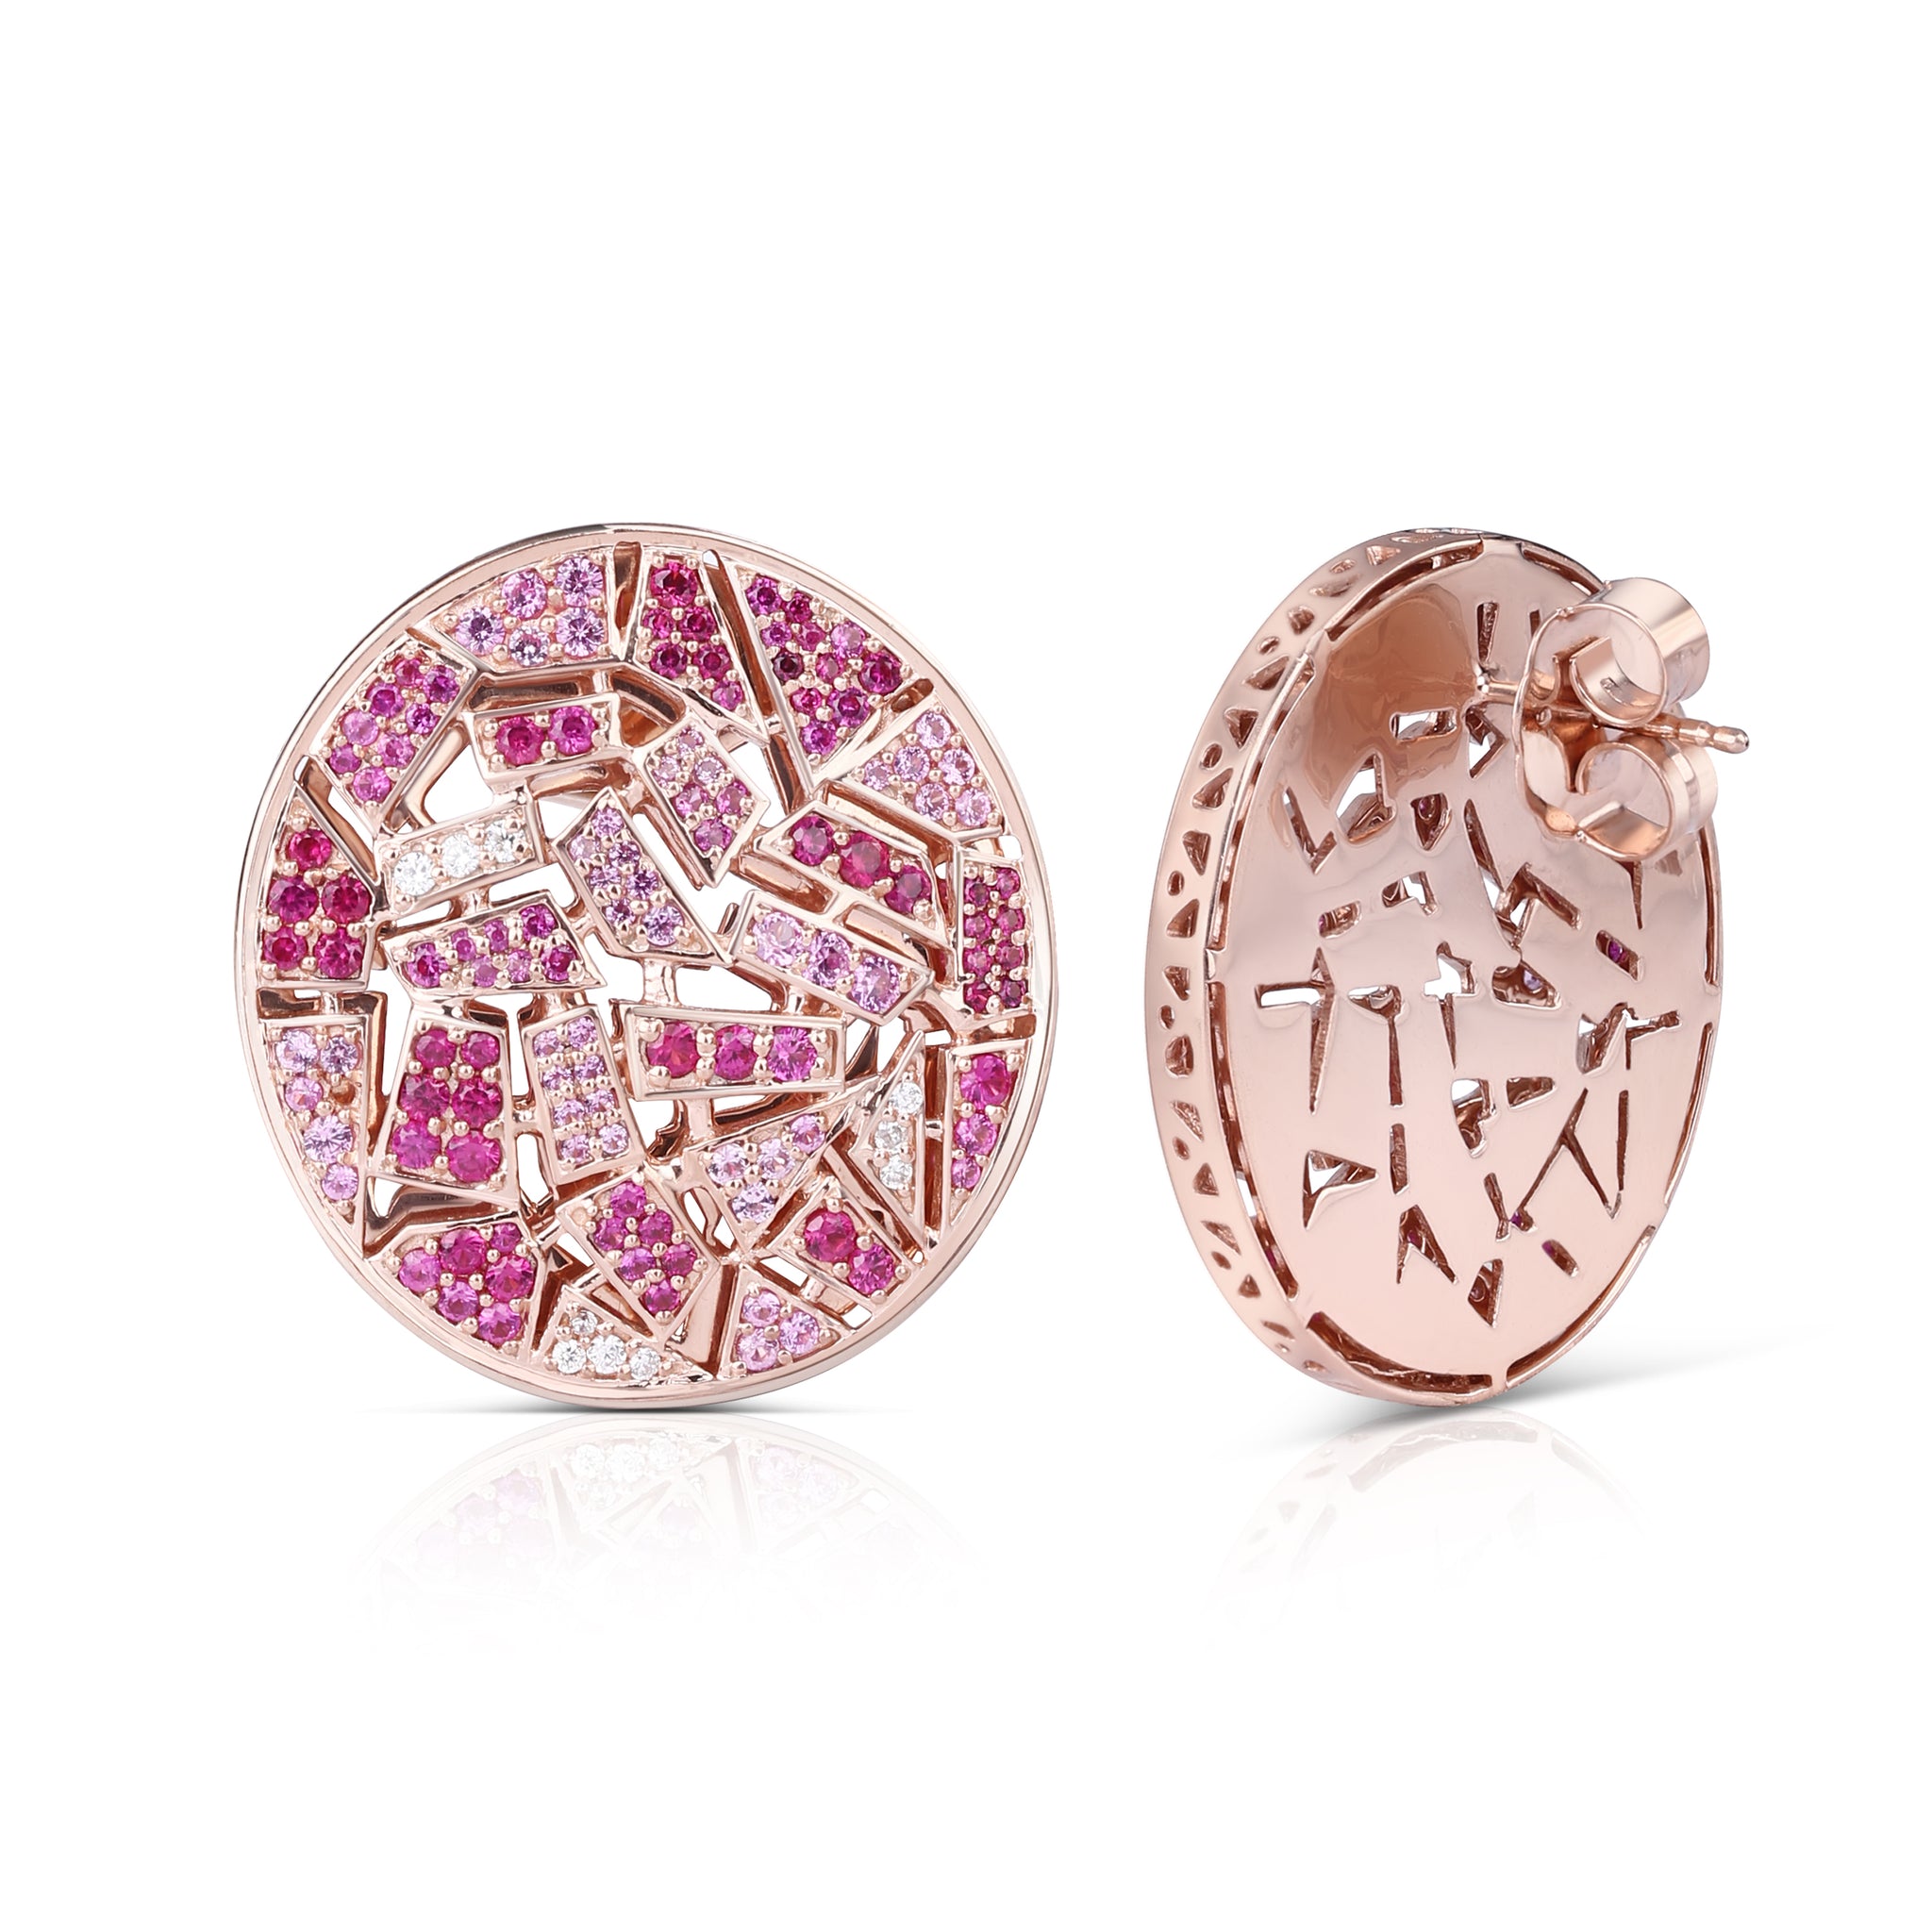 The Constellation Studs - Rose Gold